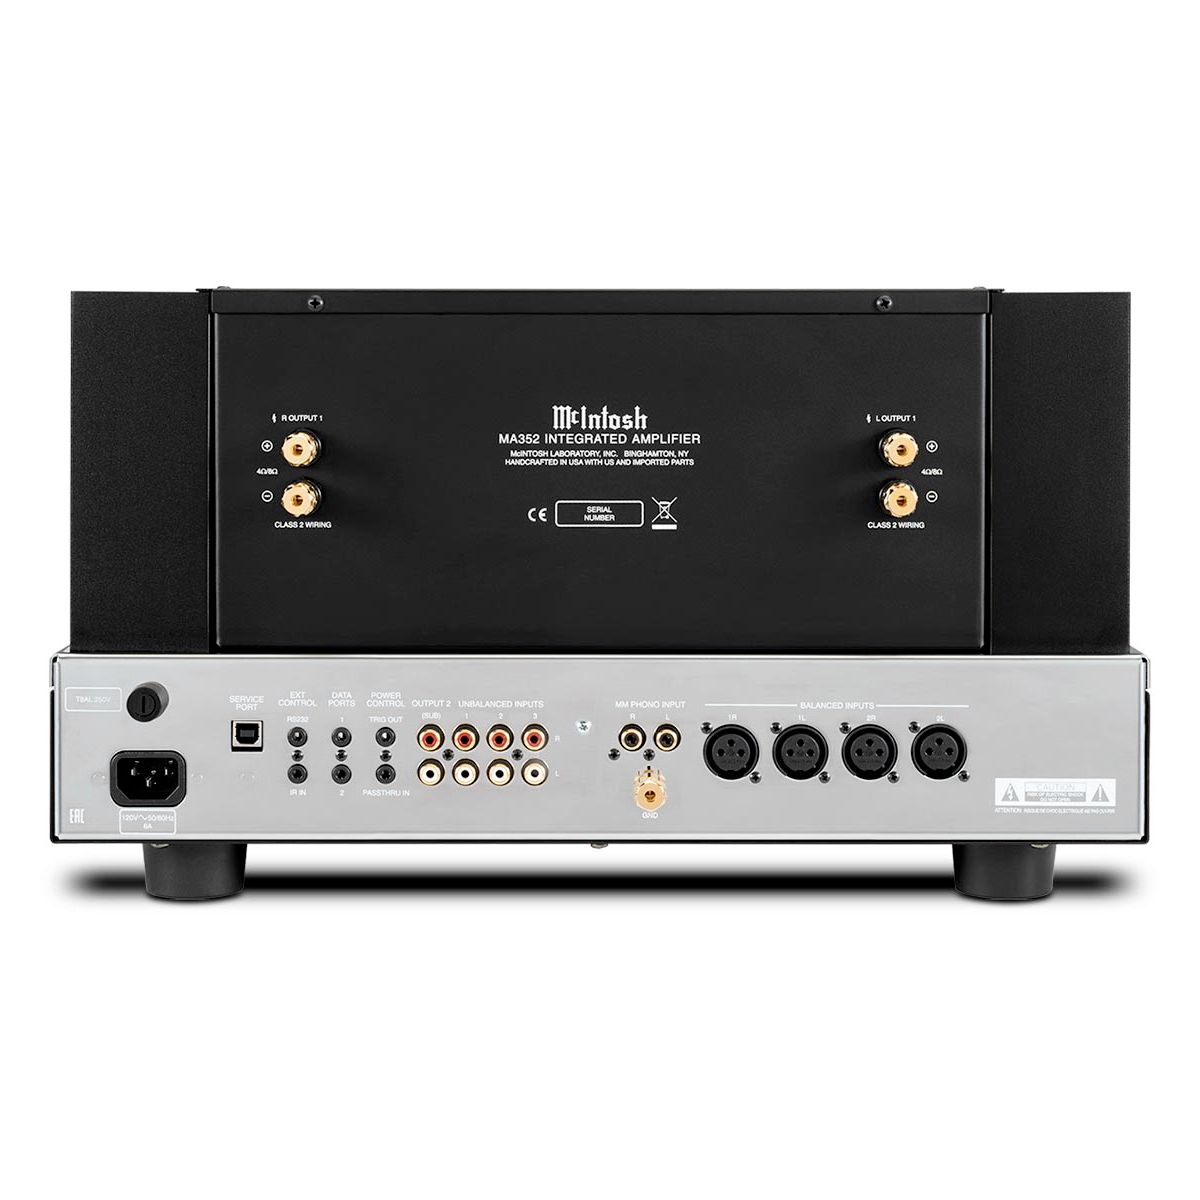 McIntosh MA352 2-Channel Integrated Amplifier